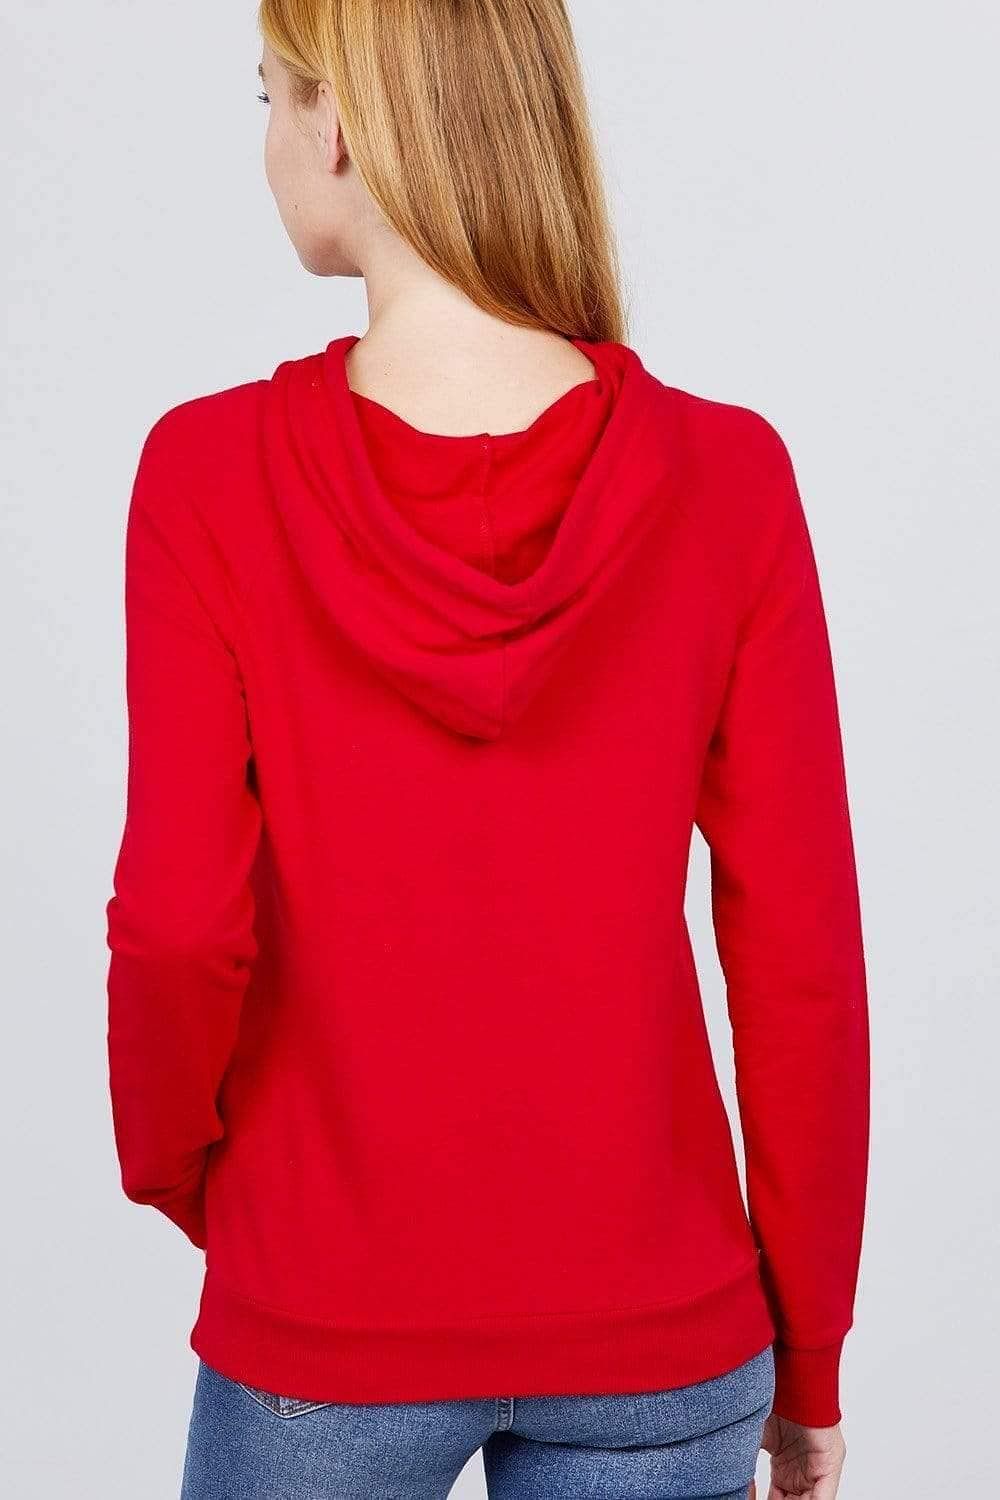 Red French Terry Long Sleeve Sweatshirt - Shopping Therapy L Sweatshirt